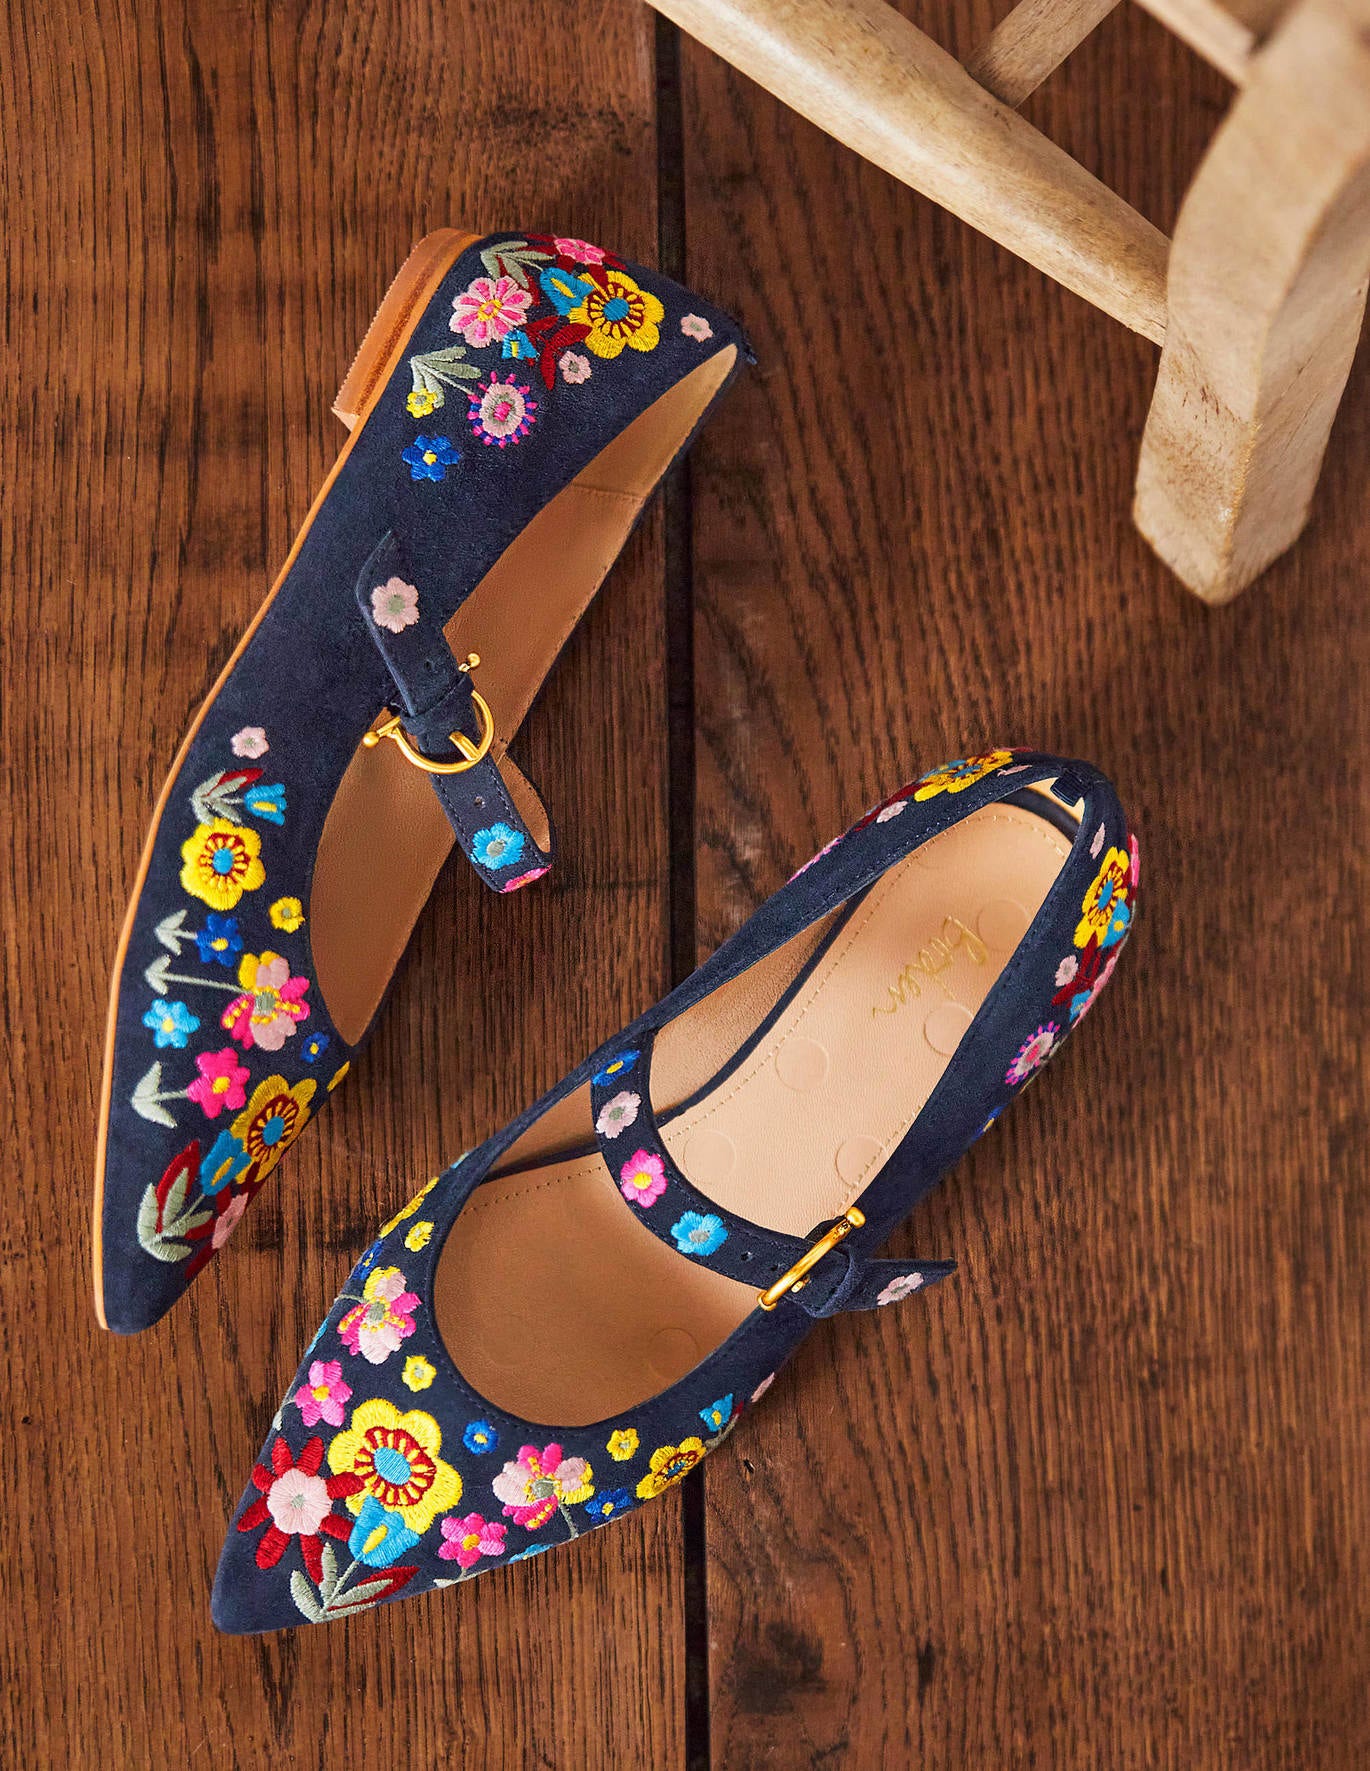 Boden Pointed Toe Mary Jane Shoes - Navy/Embroidery